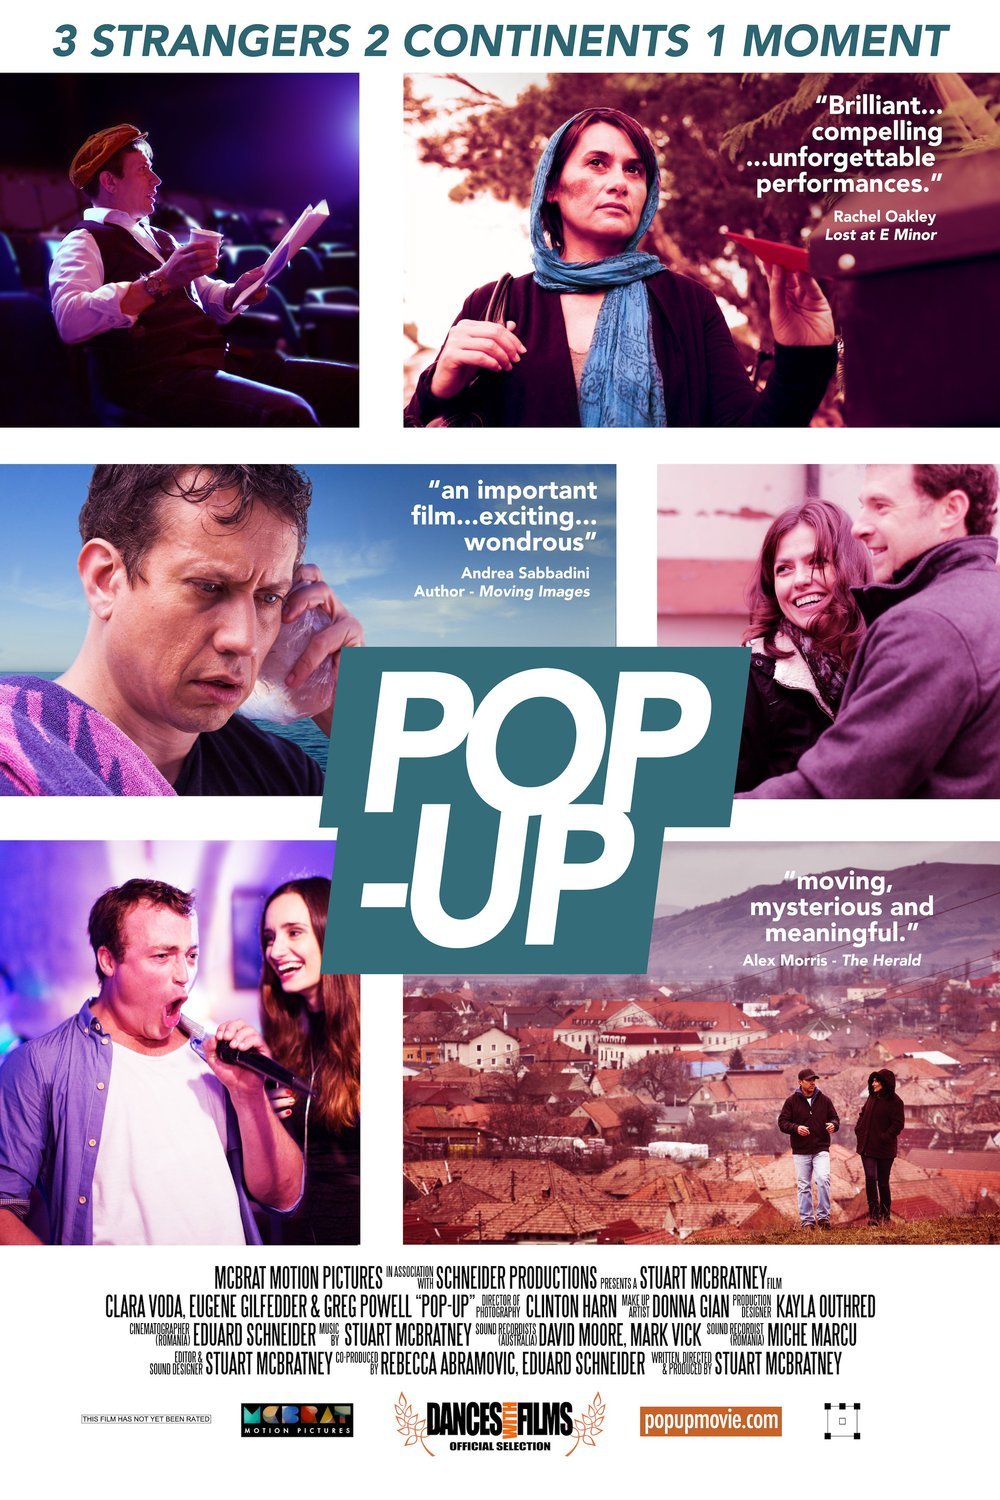 Poster of the movie Pop-Up